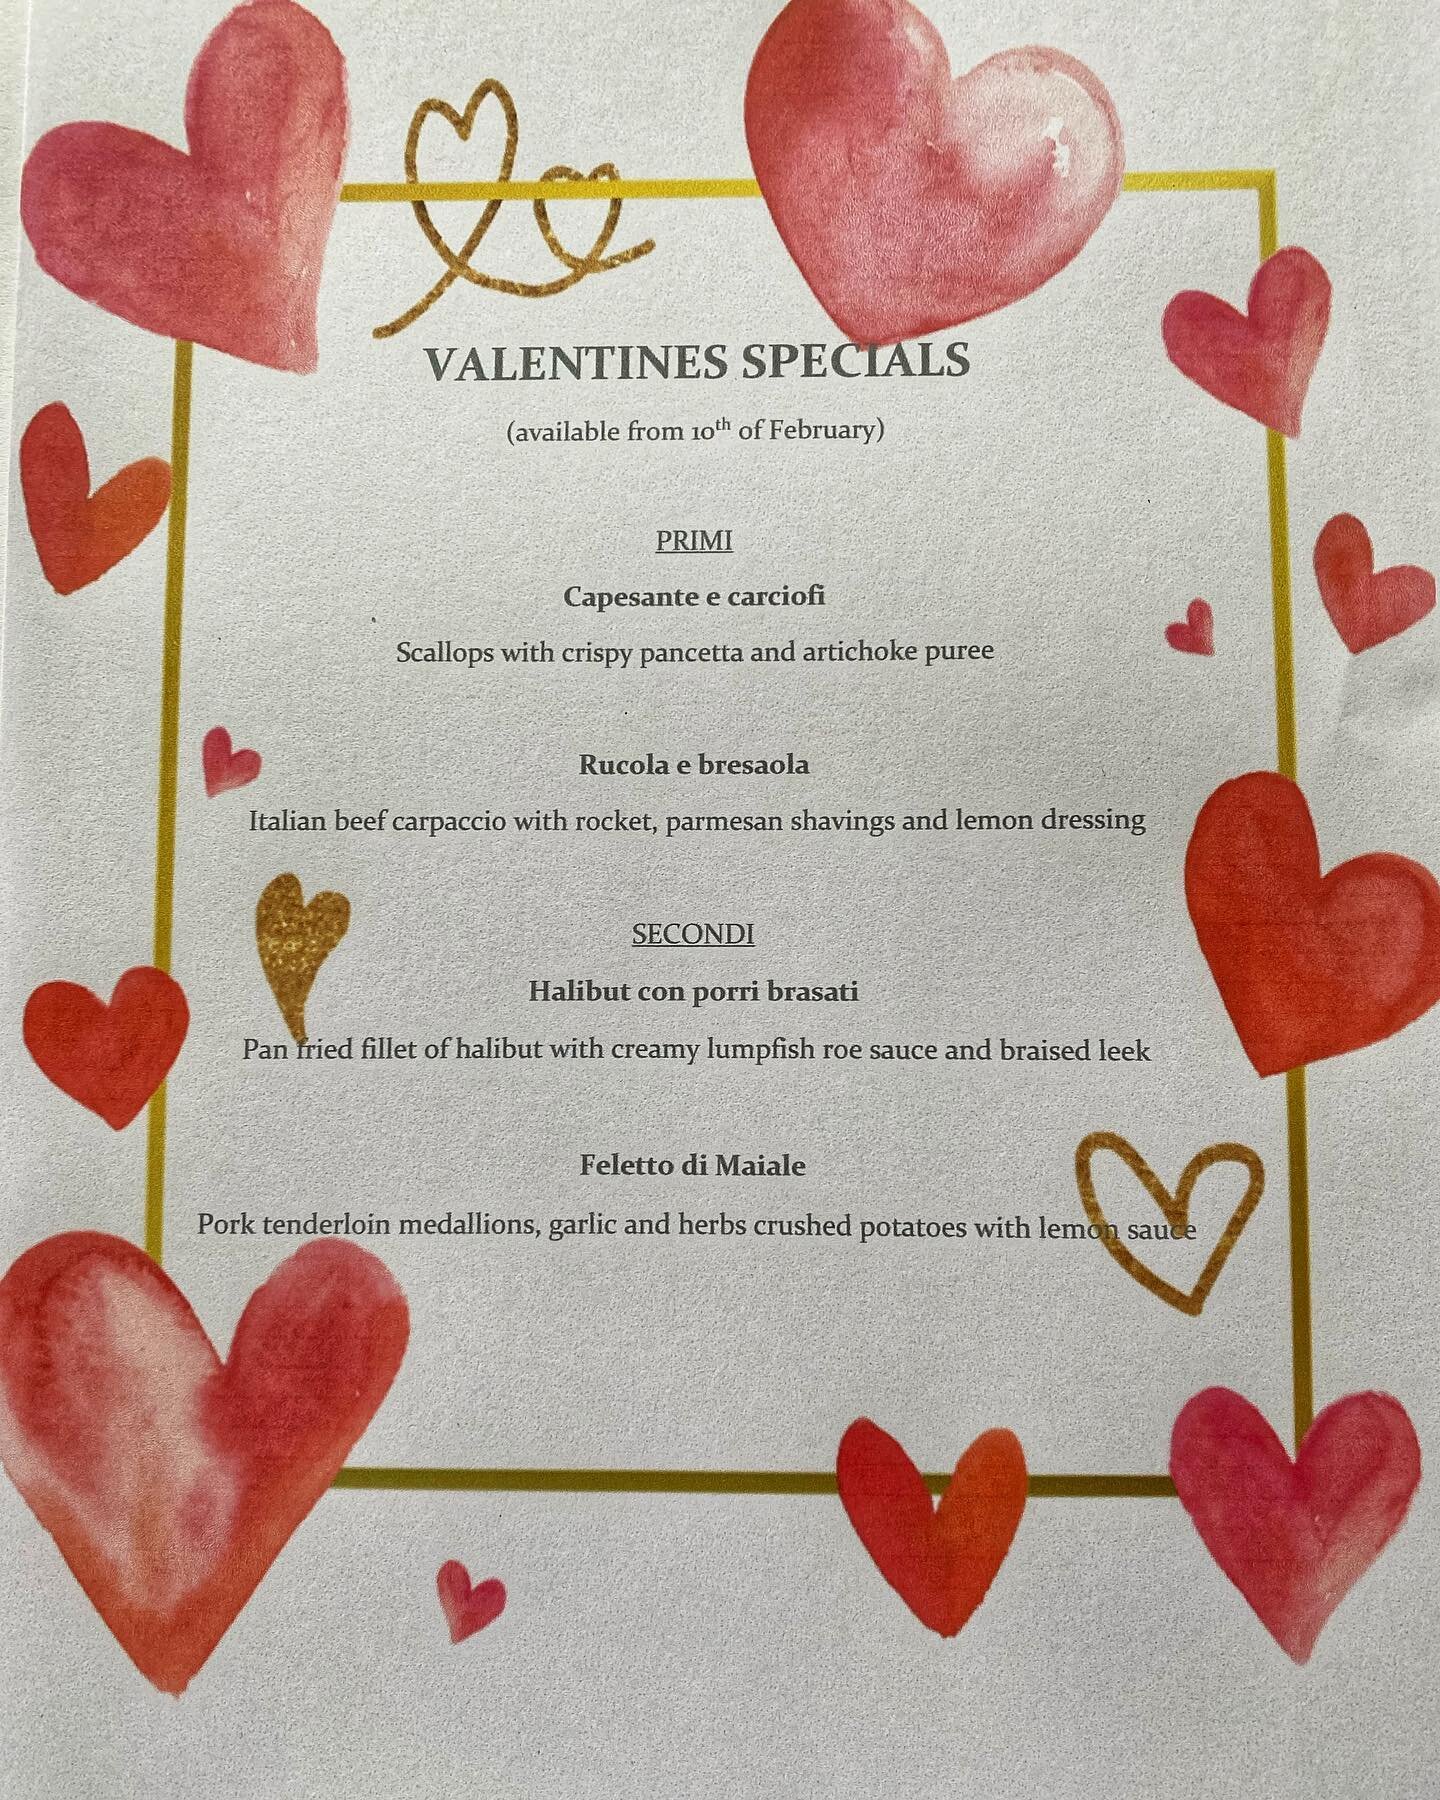 &ldquo;per conquistare un uomo bisogna prenderlo per la gola&rdquo;
or as we say 
&ldquo; the way to a man's heart is through his stomach&rdquo;

We are very exited to say that there is only little availability for tables on the Valentines day left a